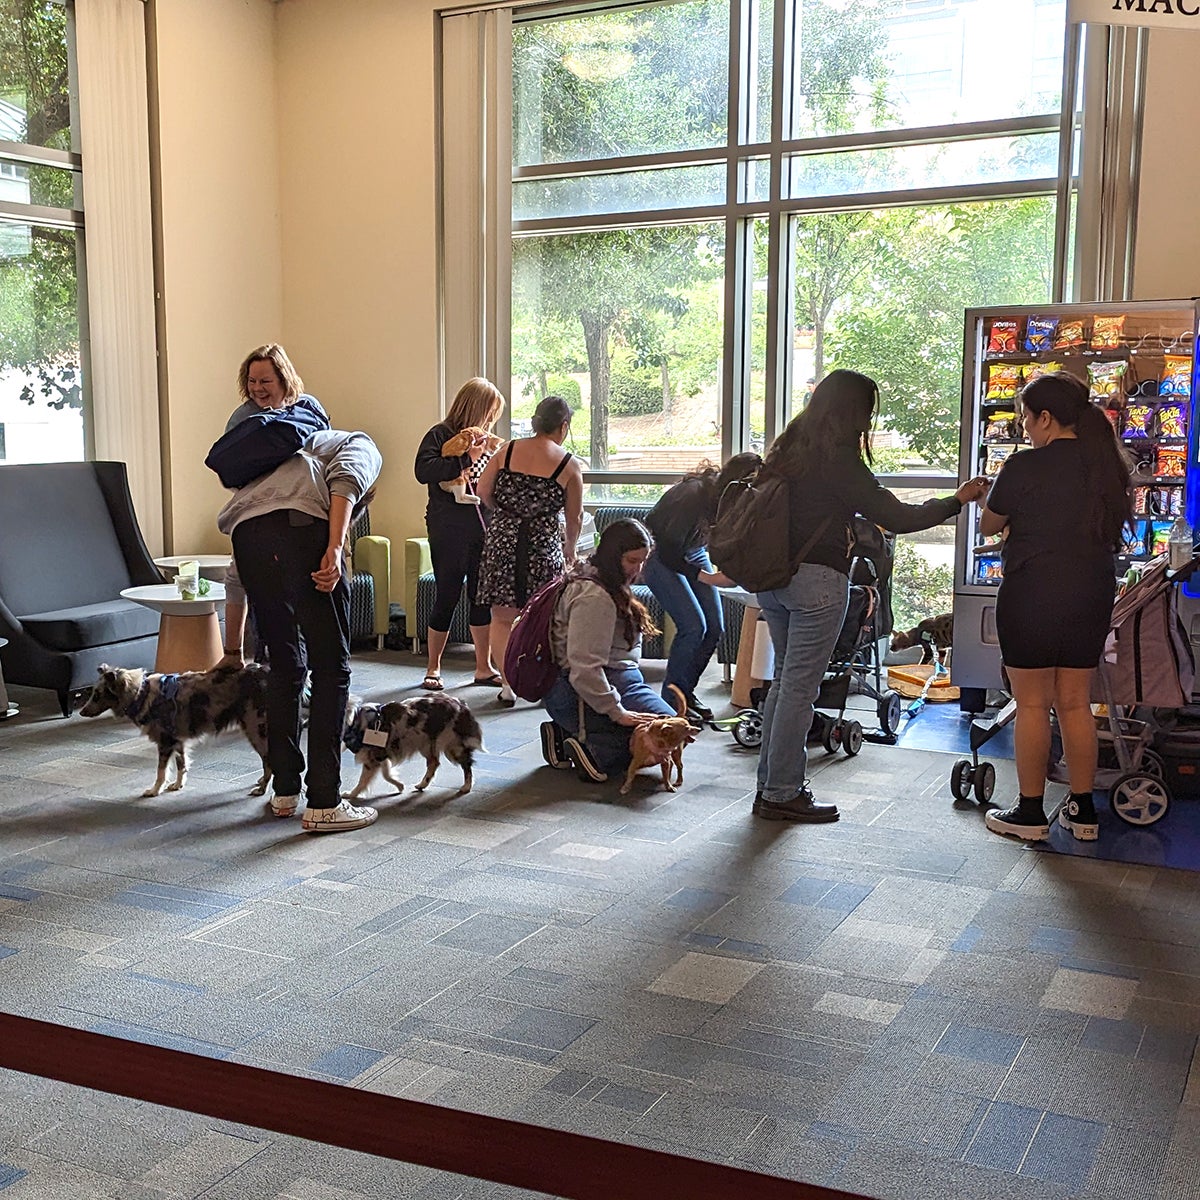 Students de-stressing during finals week by playing with and petting dogs from  Therapy Fluffies (trained therapy animals) program.